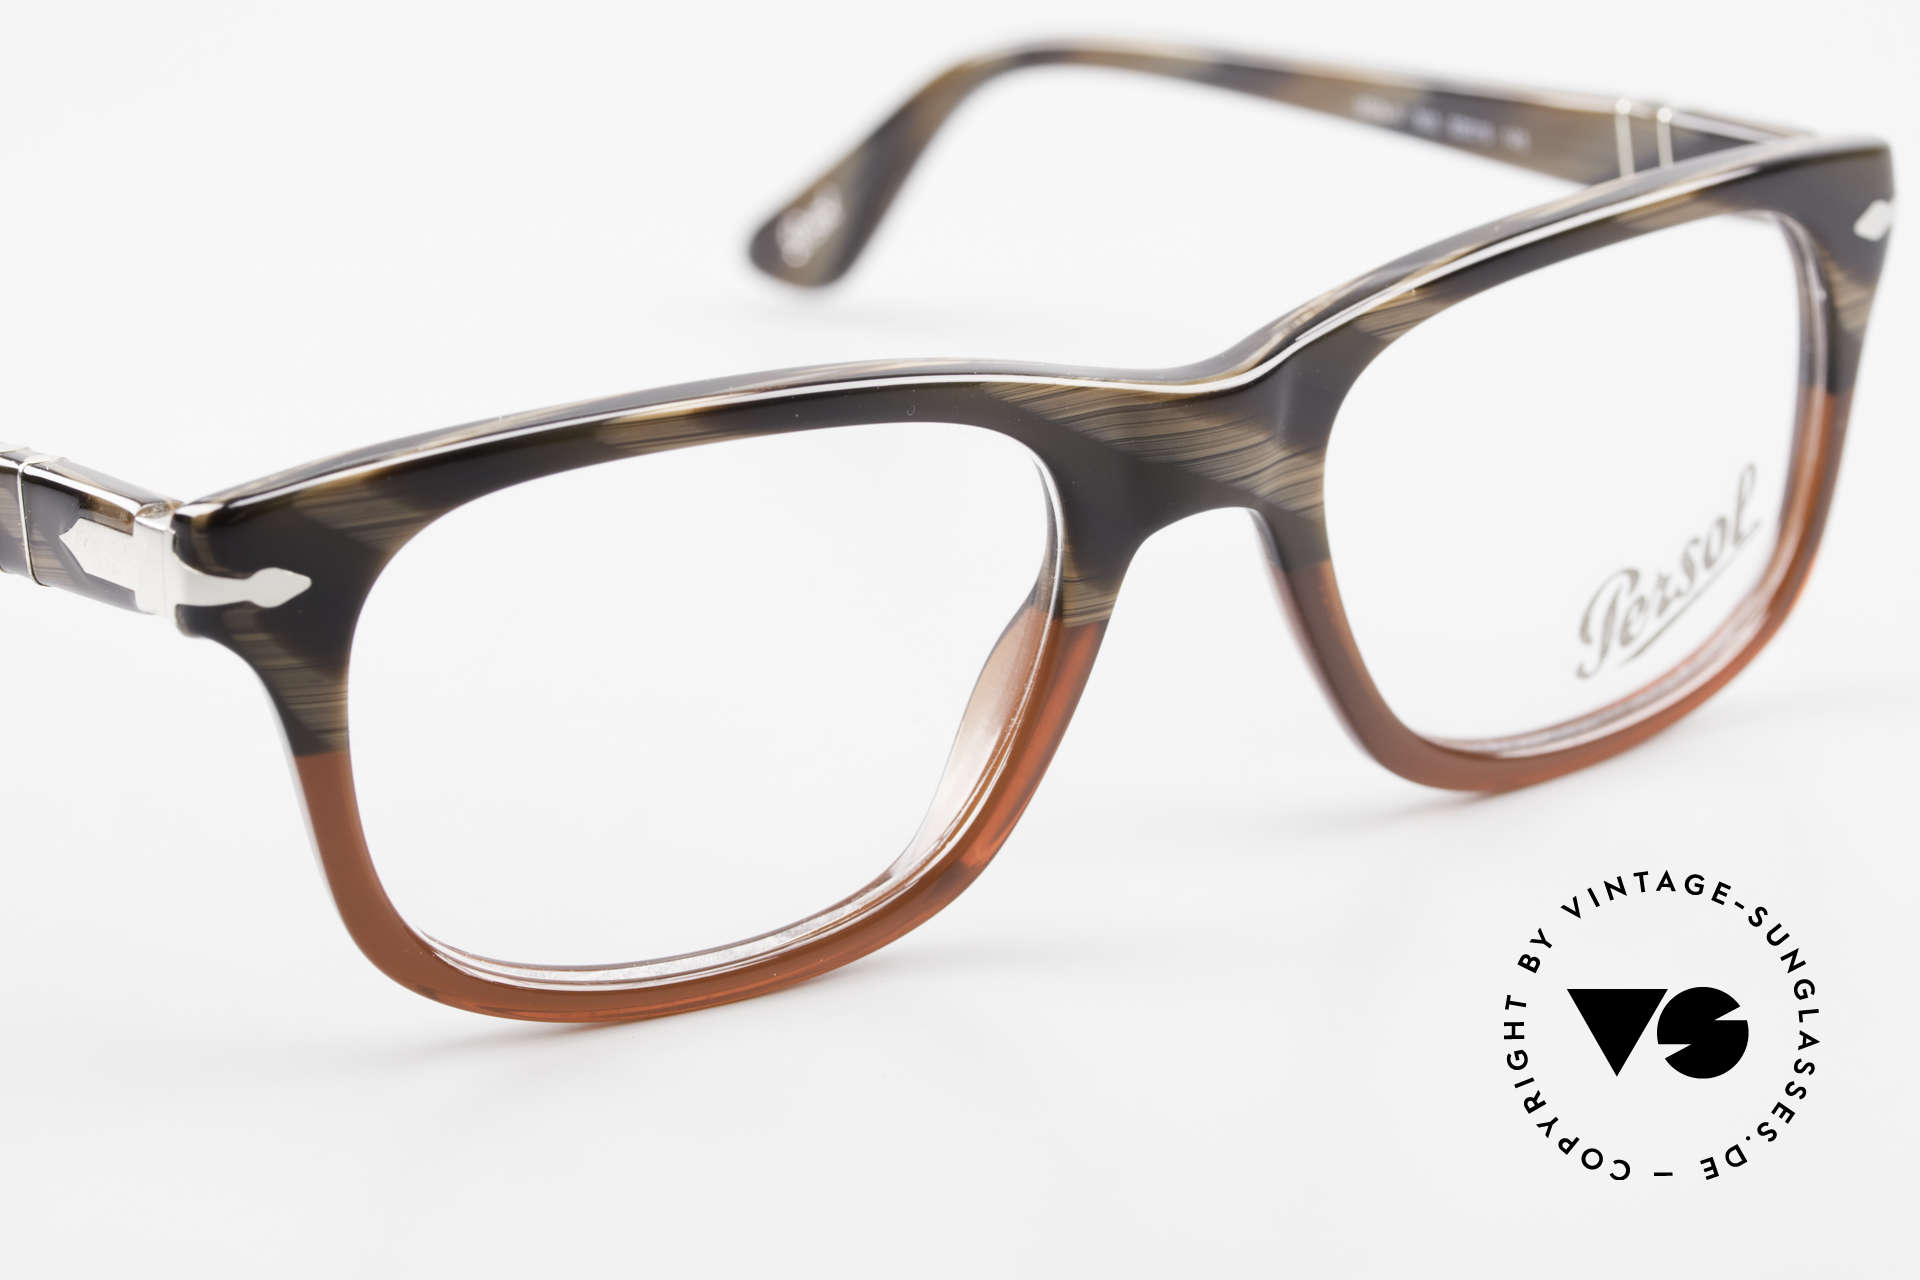 Persol 3029 Small Persol Eyeglasses Unisex, DEMOS can be replaced with lenses of any kind, Made for Men and Women